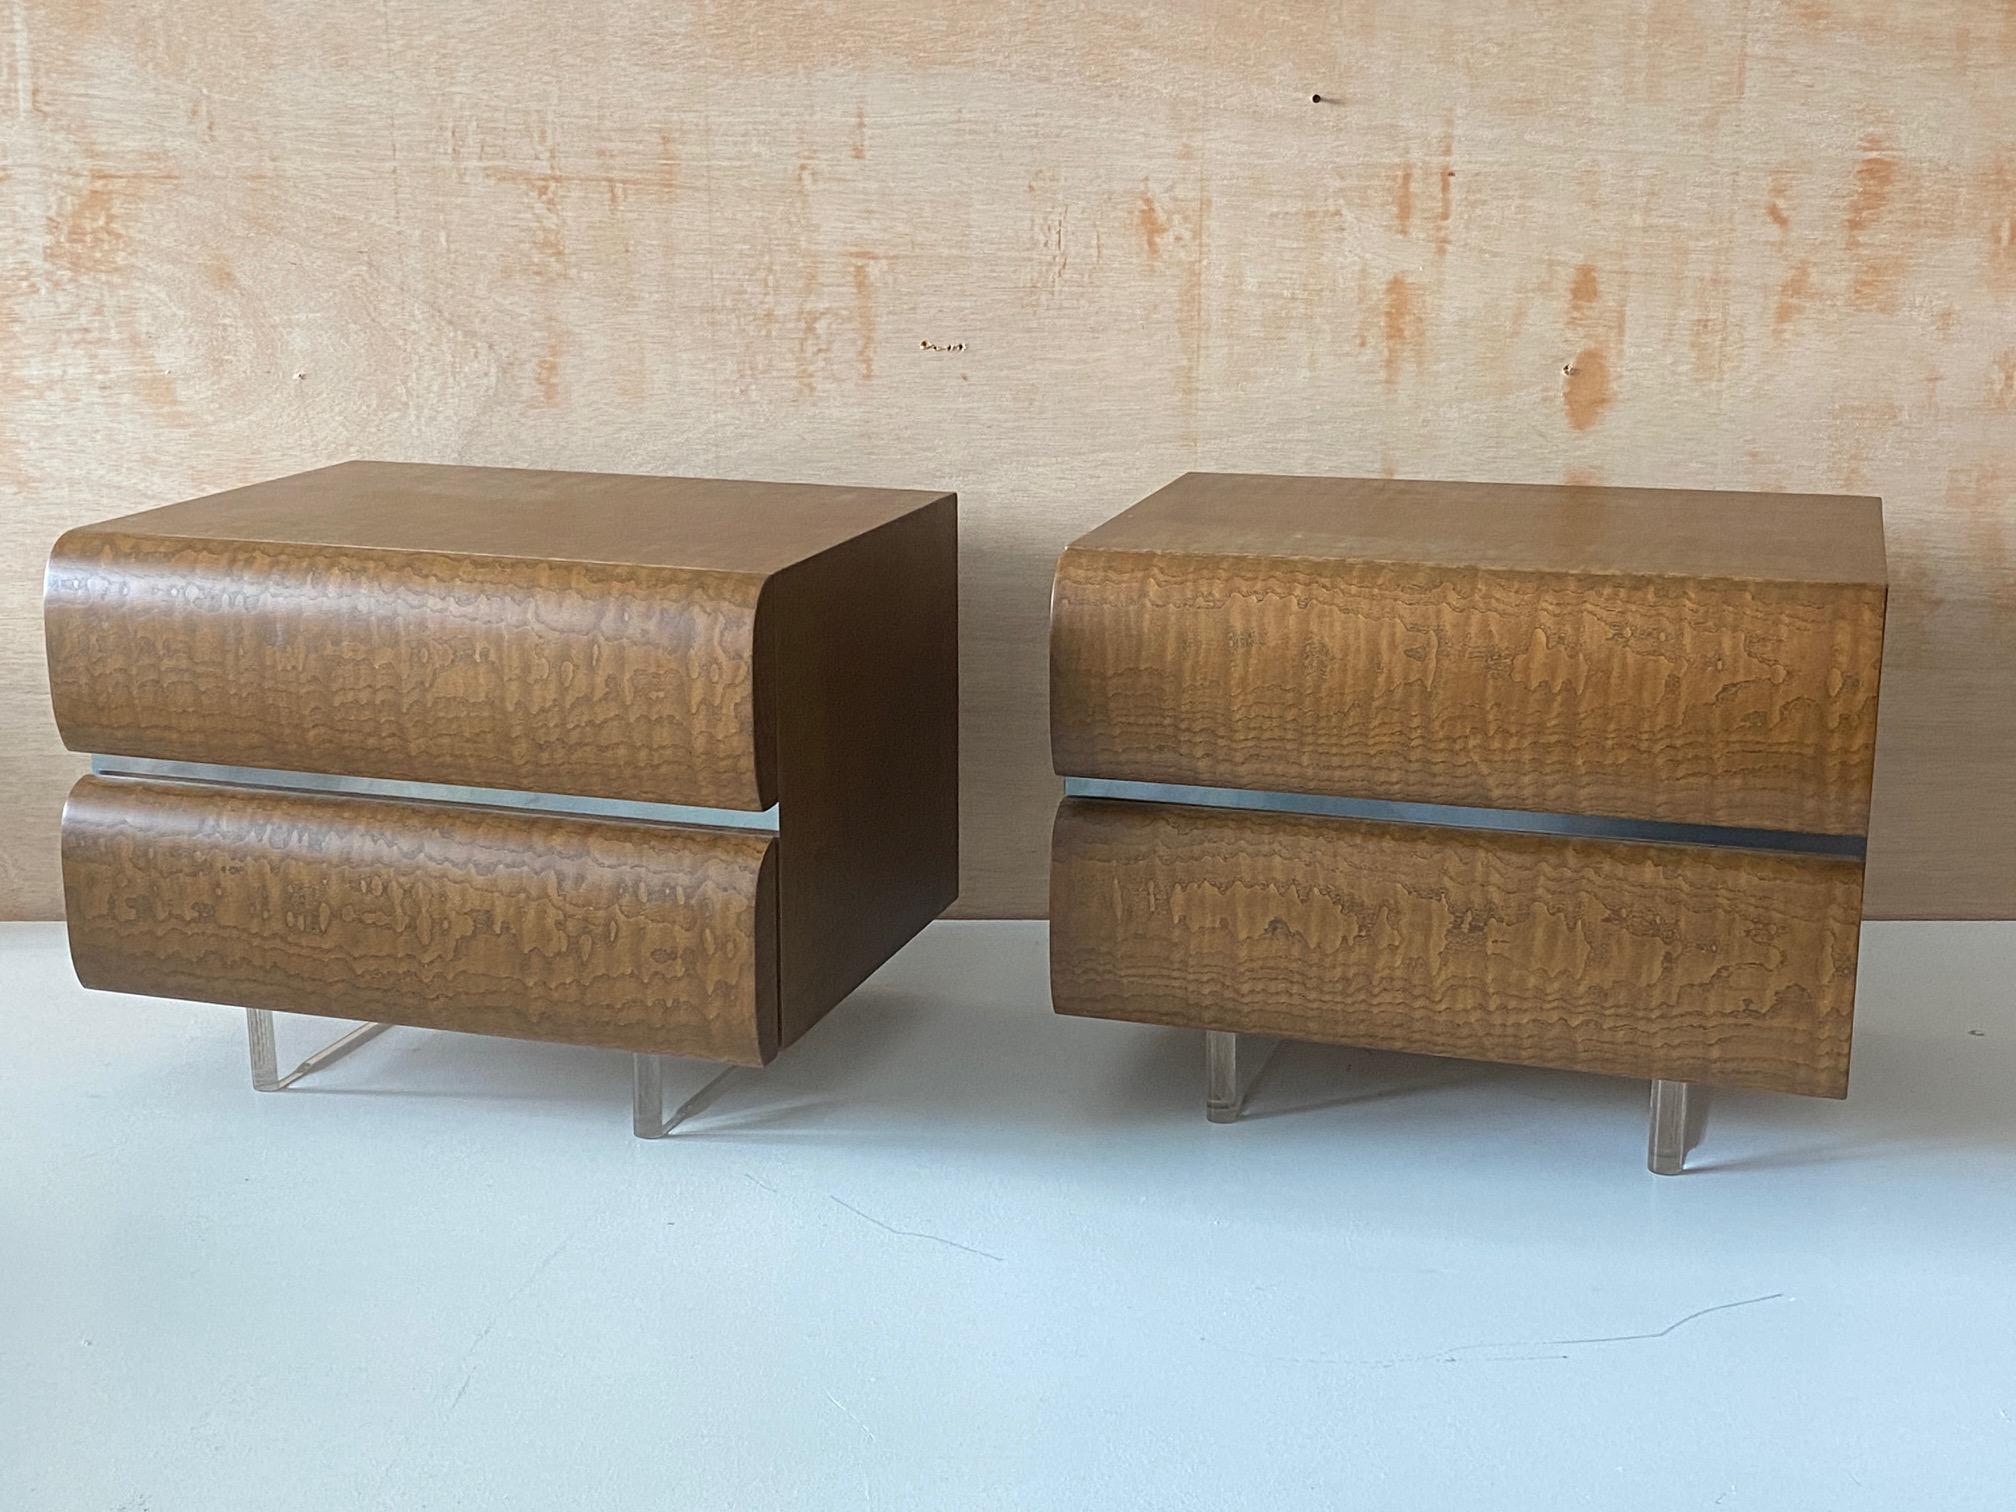 A pair of nightstands / bedside cabinets. Designed by Vladimir Kagan. Produced by Vladimir Kagan Inc. Marked with manufacturers plaque reading 